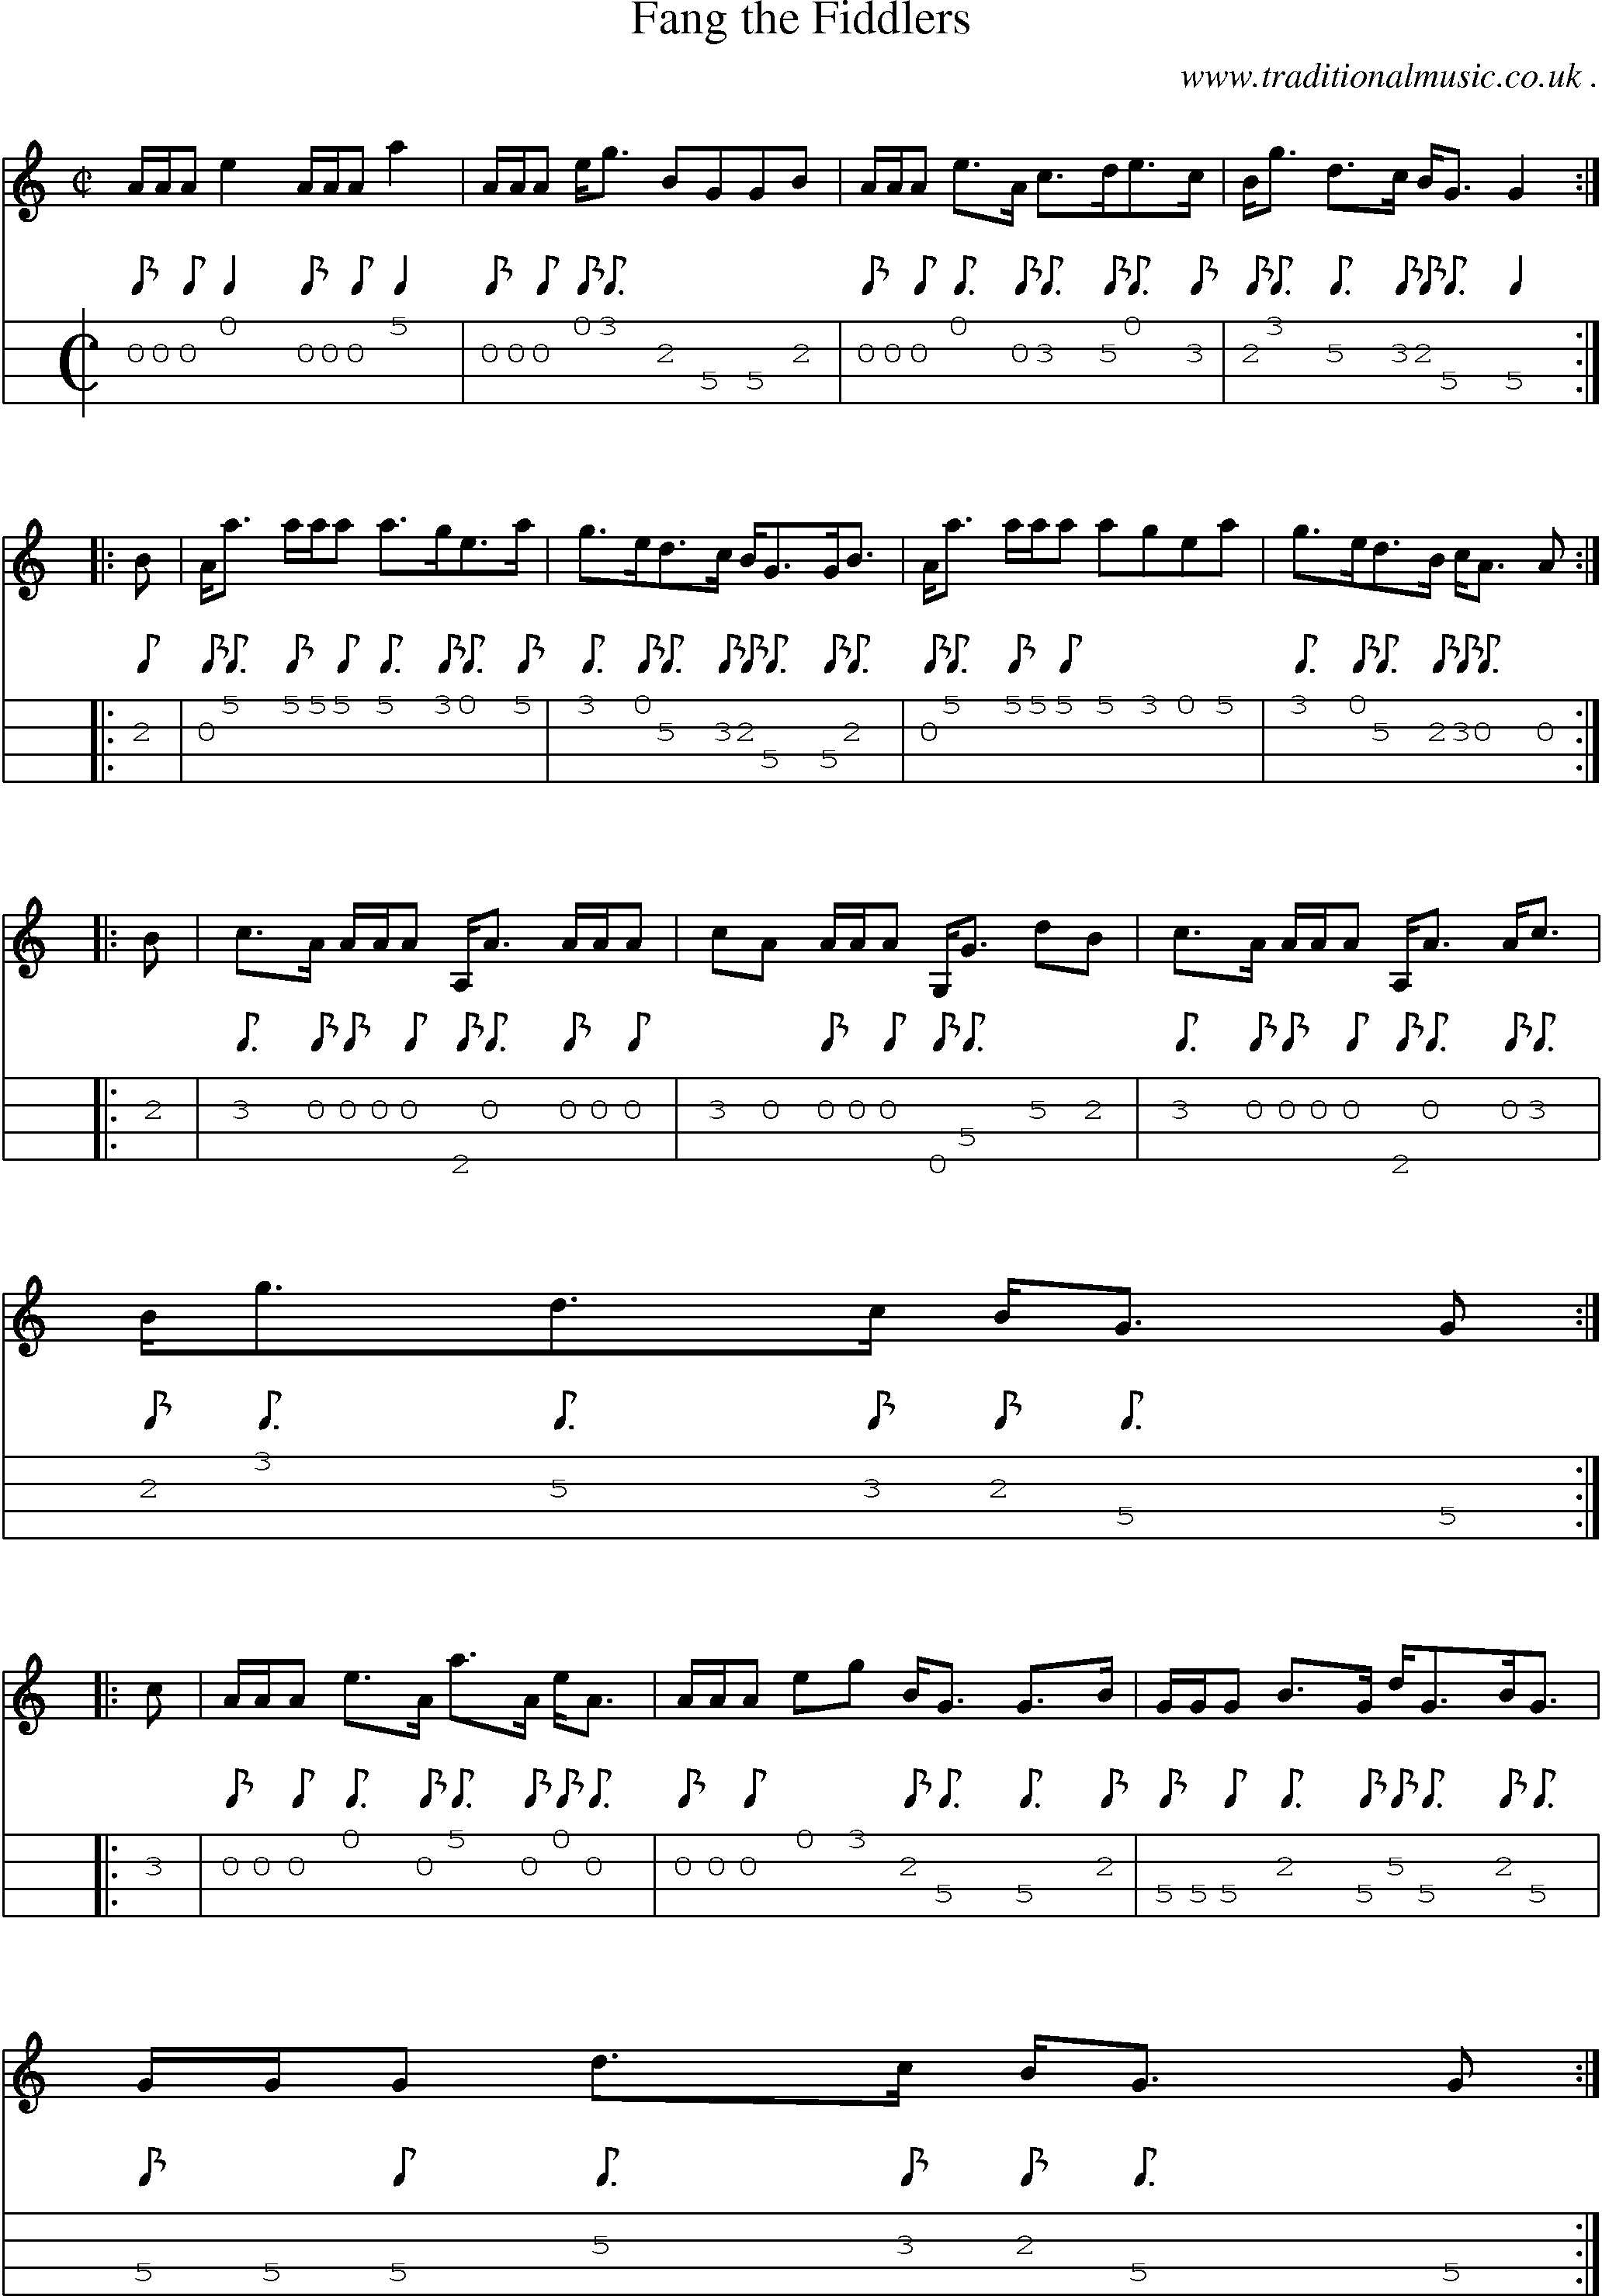 Sheet-music  score, Chords and Mandolin Tabs for Fang The Fiddlers